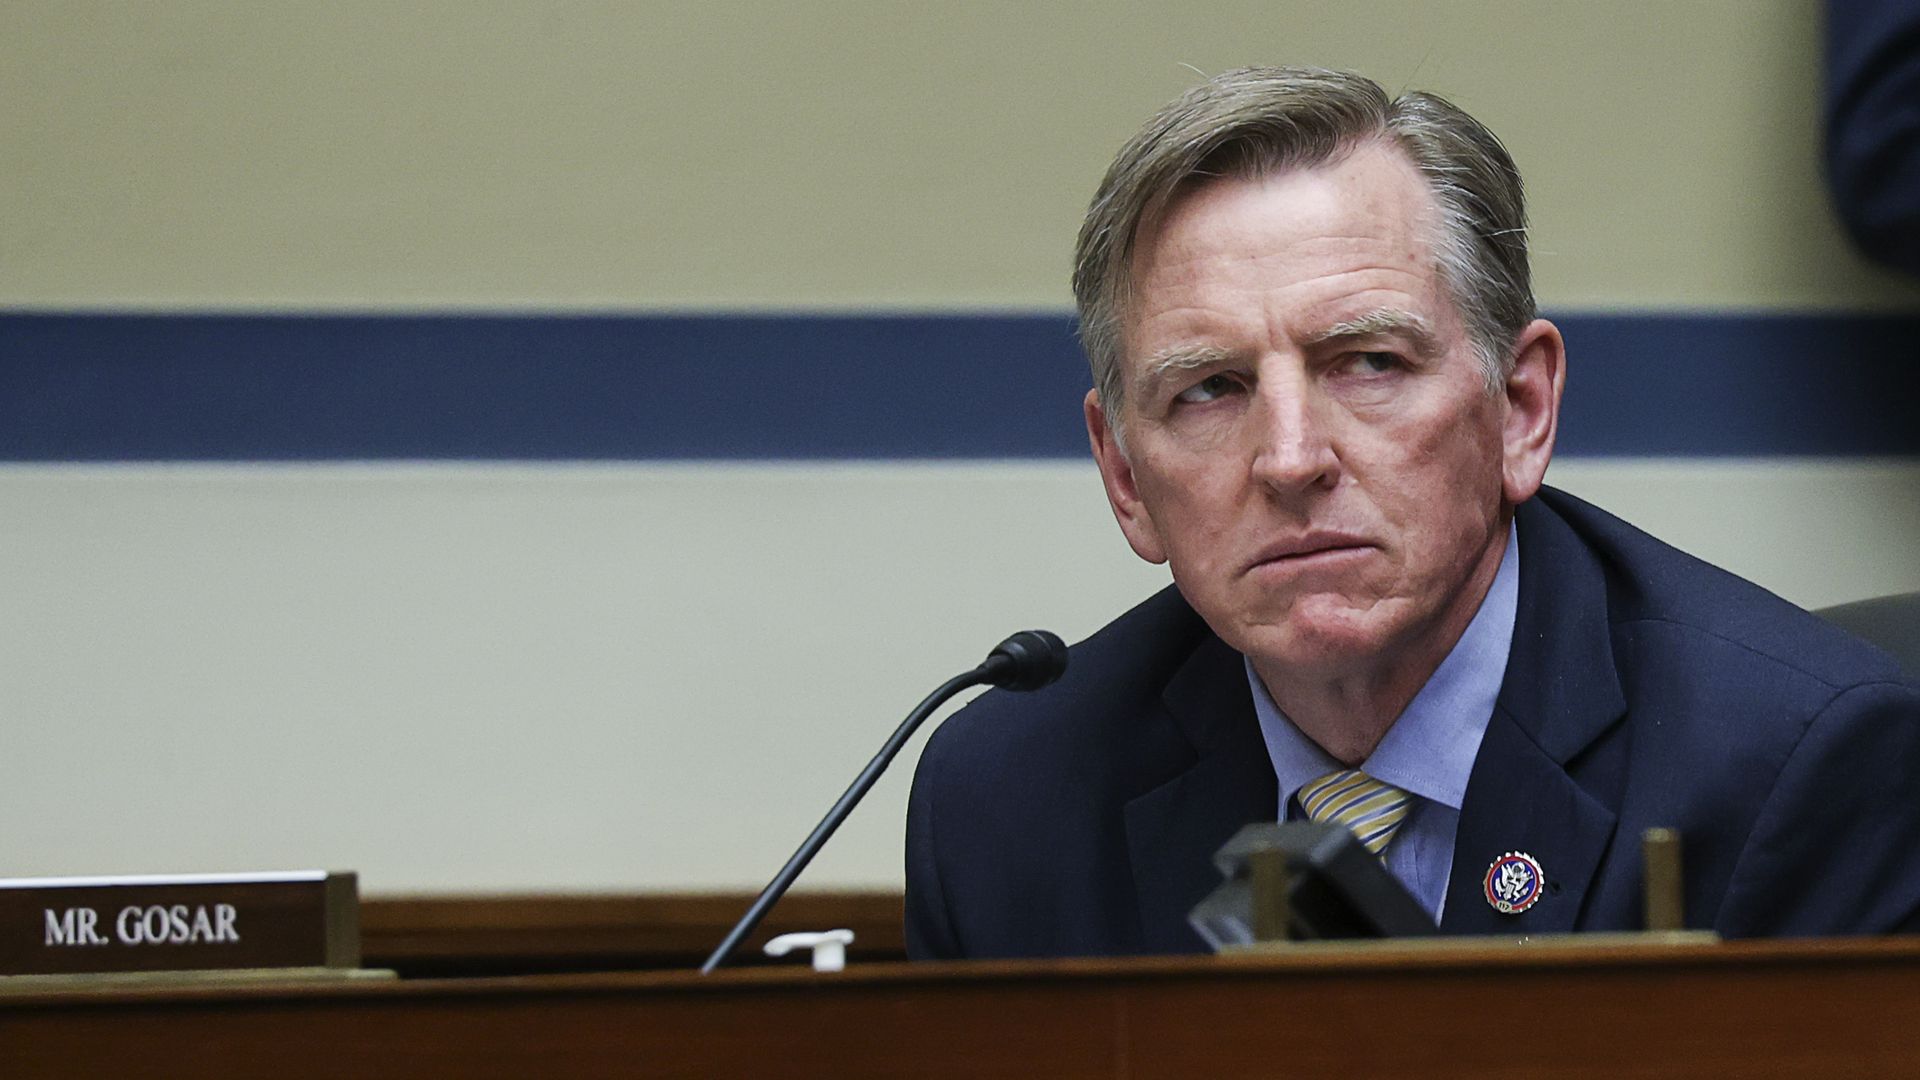  Rep. Paul Gosar (R-Ariz.) attends a House Oversight and Reform Committee hearing 